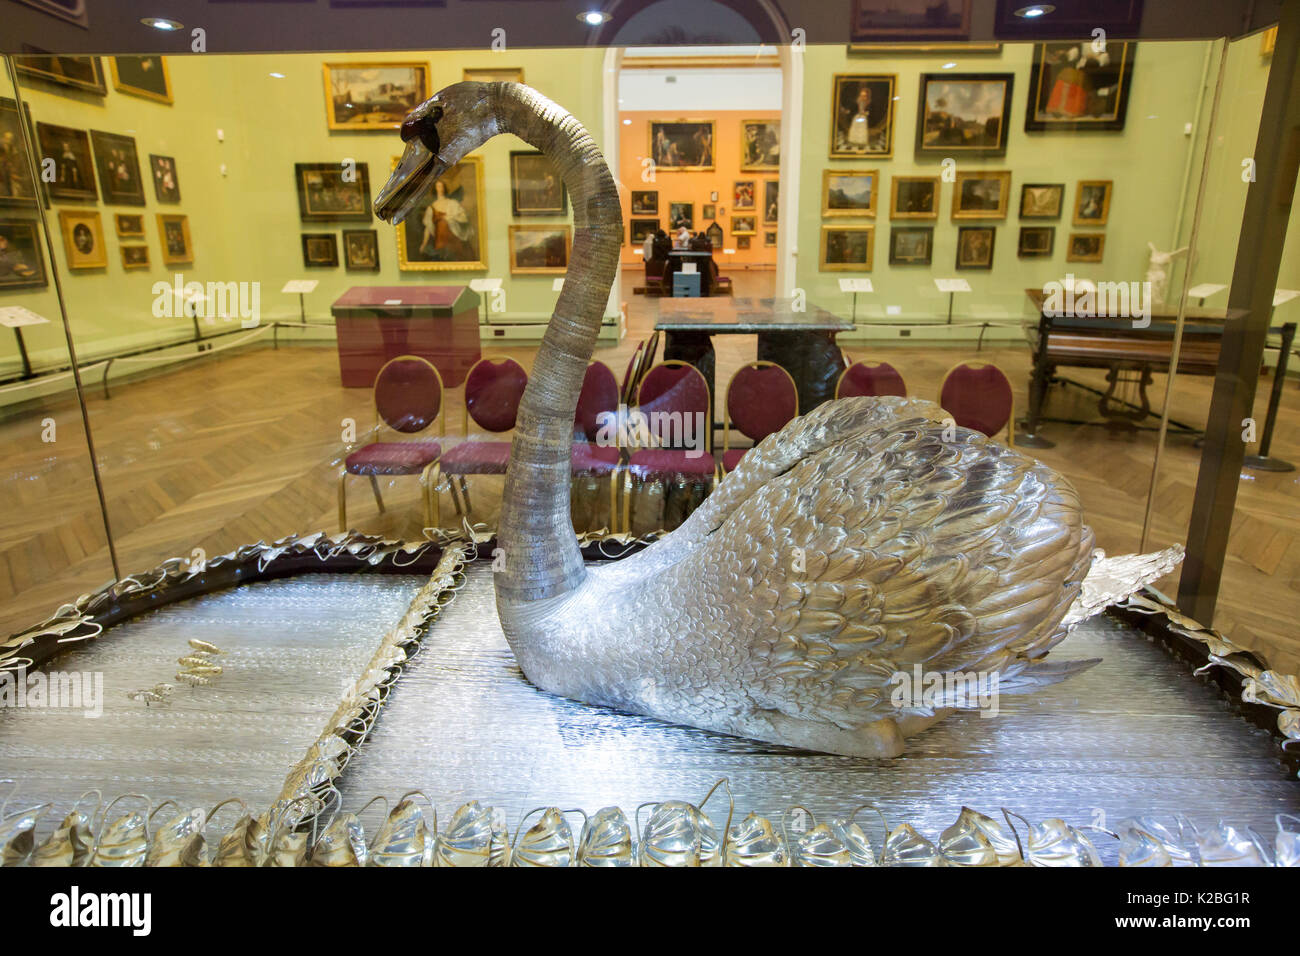 The famous musical automaton swan in the Bowes Museum, Barnard Castle, UK. Stock Photo